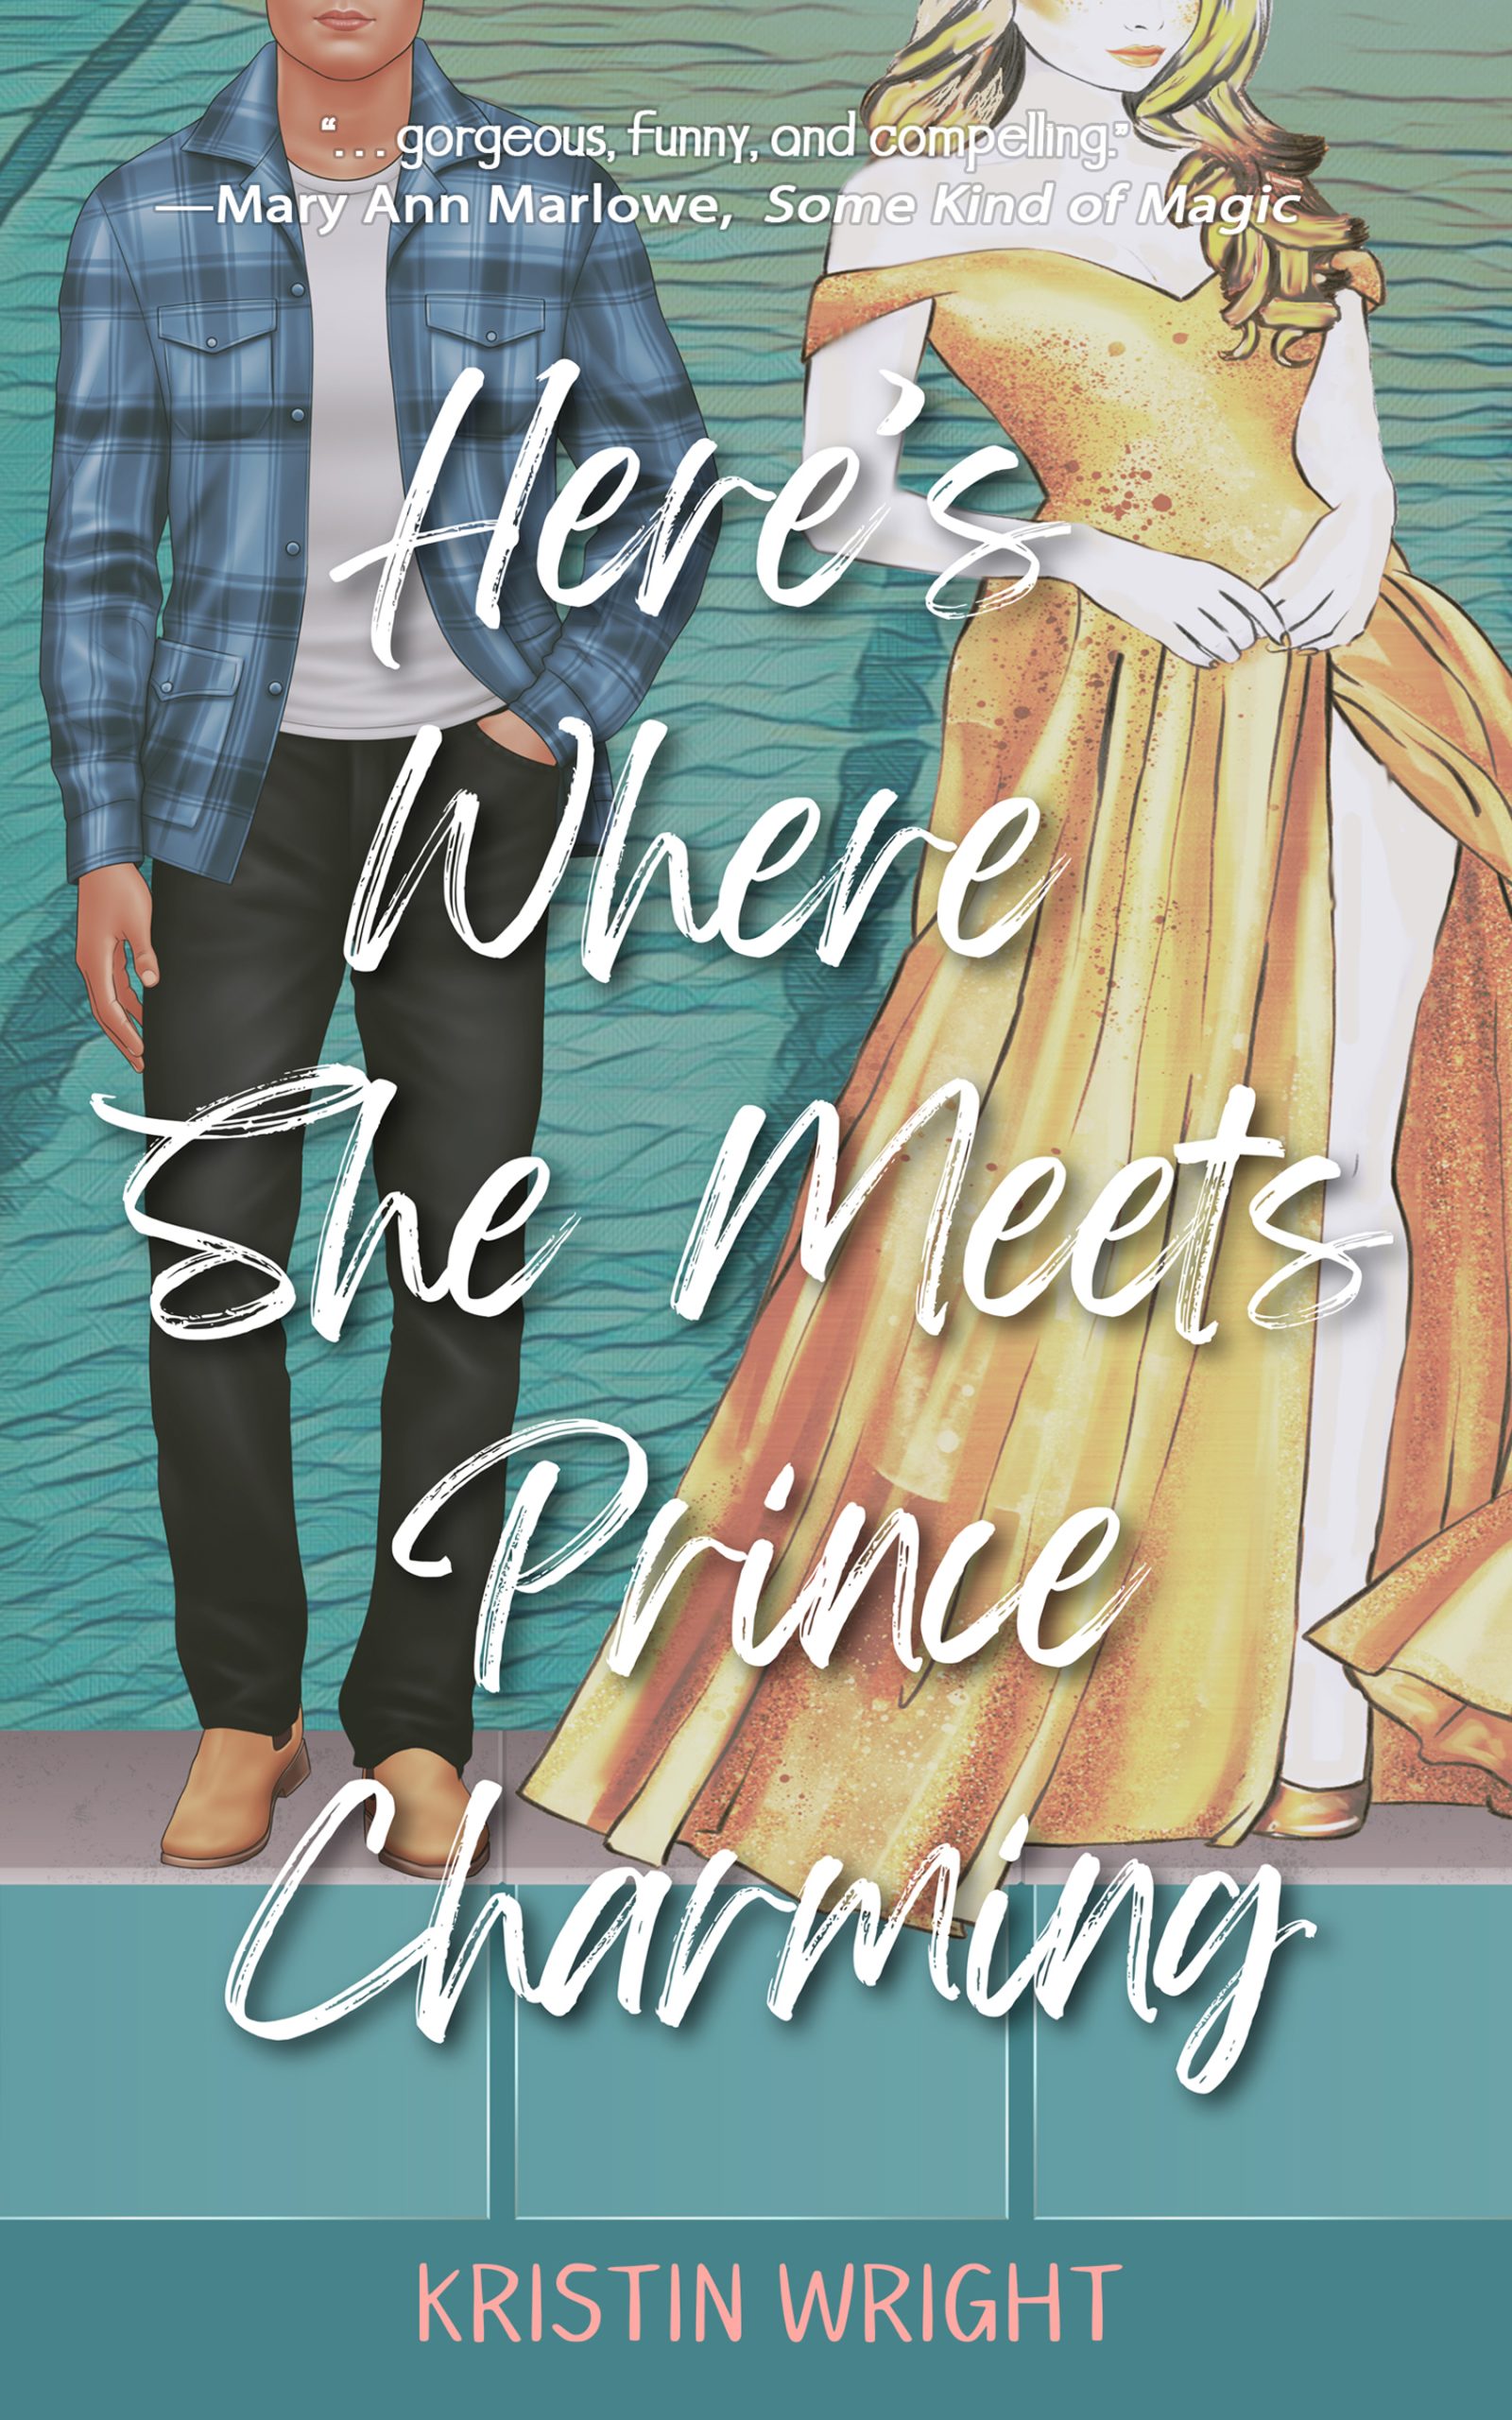 Guest Post:  Author Kristin Wright (Here's Where She Meets Prince Charming), Plus Giveaway ~ US Only!